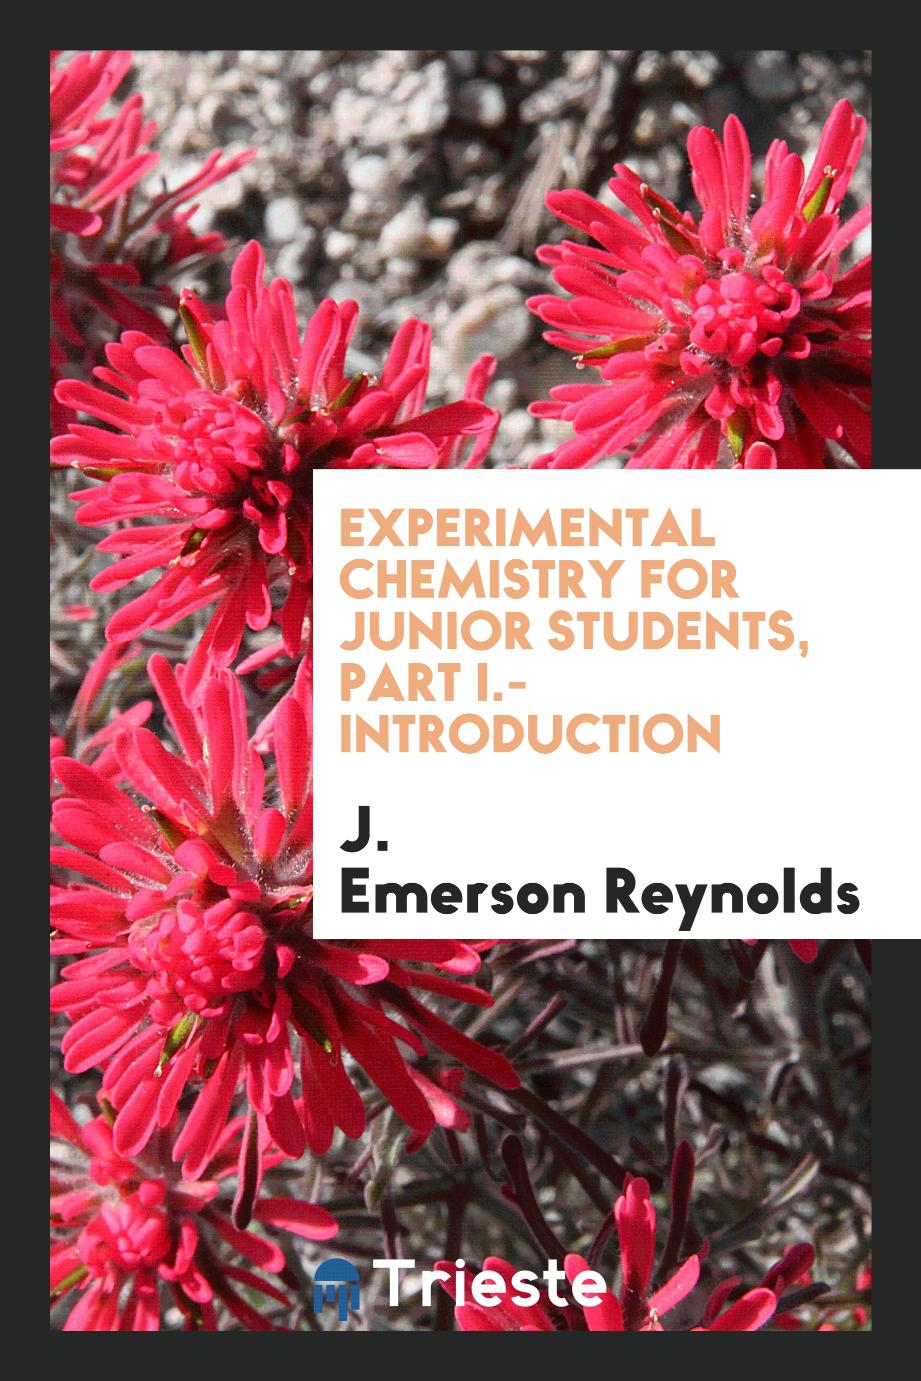 Experimental Chemistry for Junior Students, Part I.-Introduction